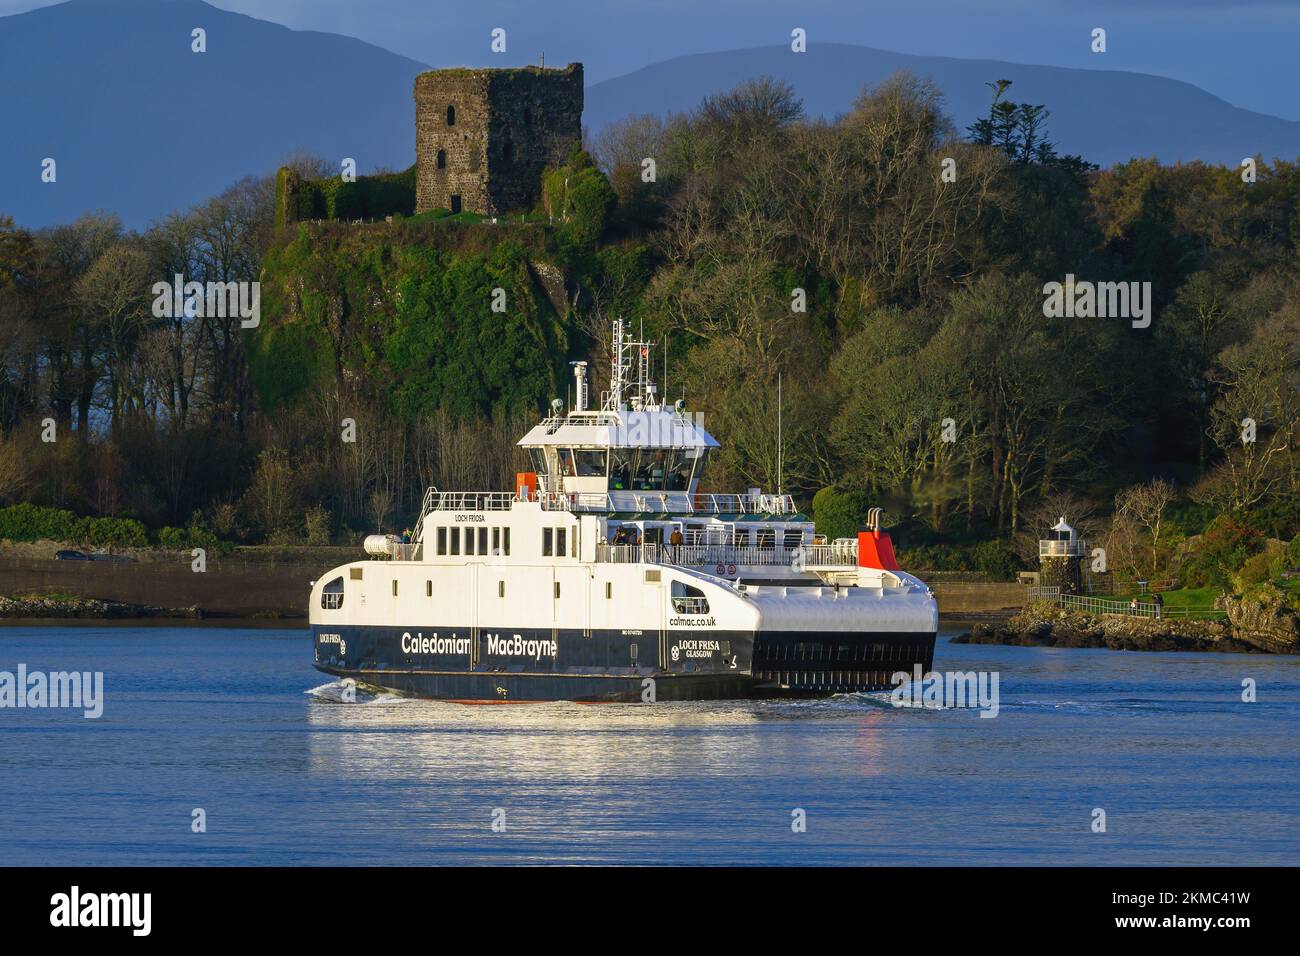 Loch Frisa is a ferry operated by Caledonian MacBrayne between Oban and the Isle of Mull in Scotland. Stock Photo